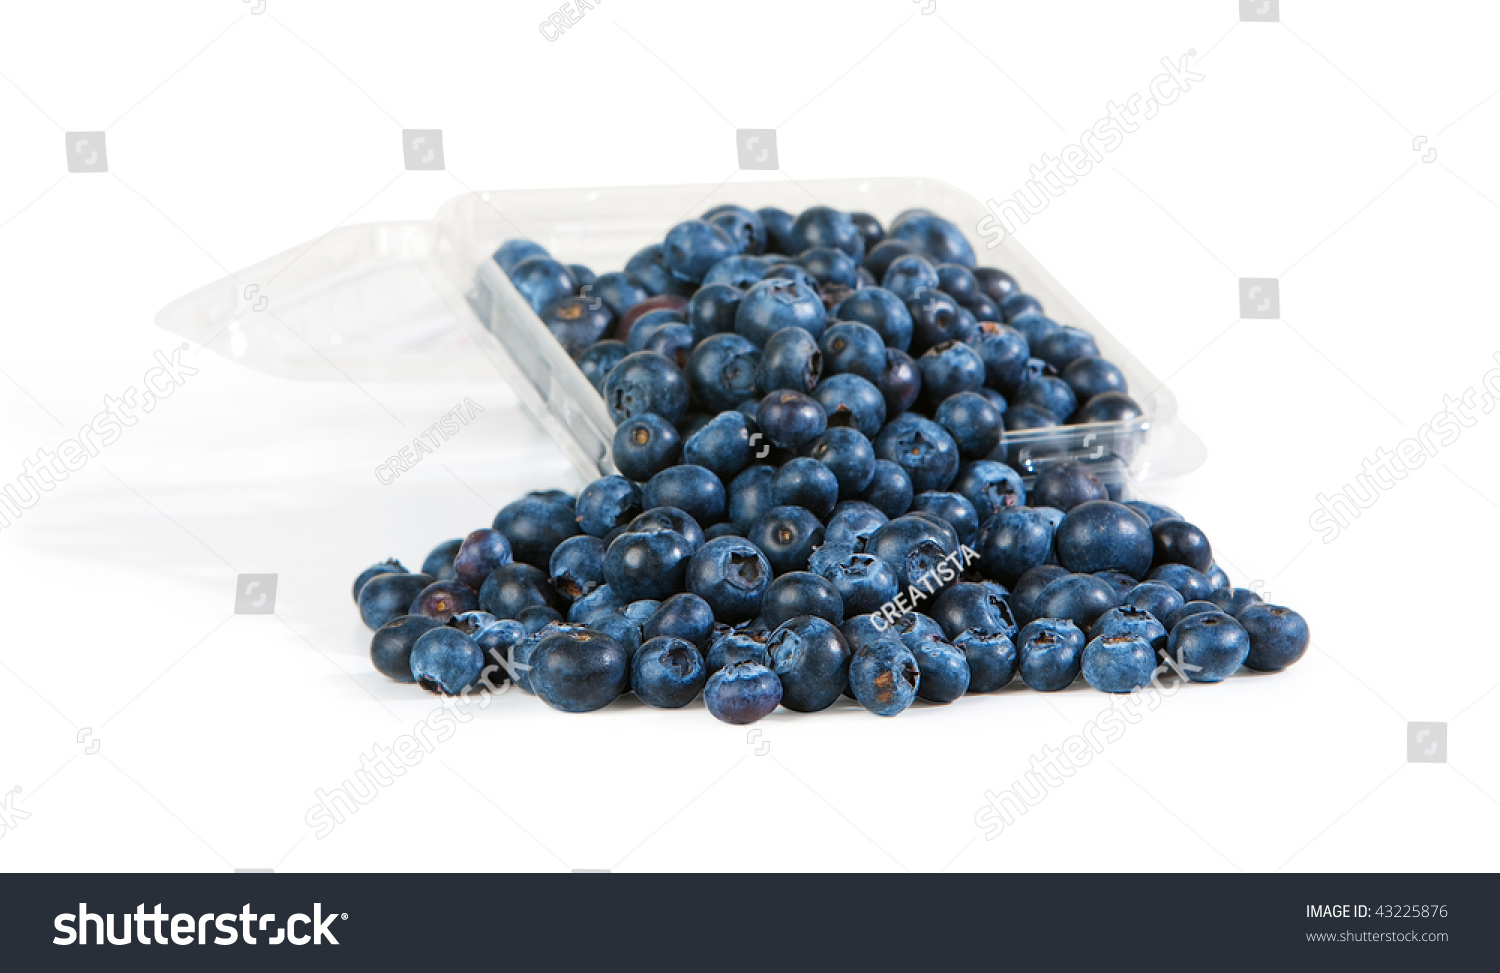 Download Plastic Container Overflowing Abundant Fresh Blueberries Stock Photo Edit Now 43225876 Yellowimages Mockups